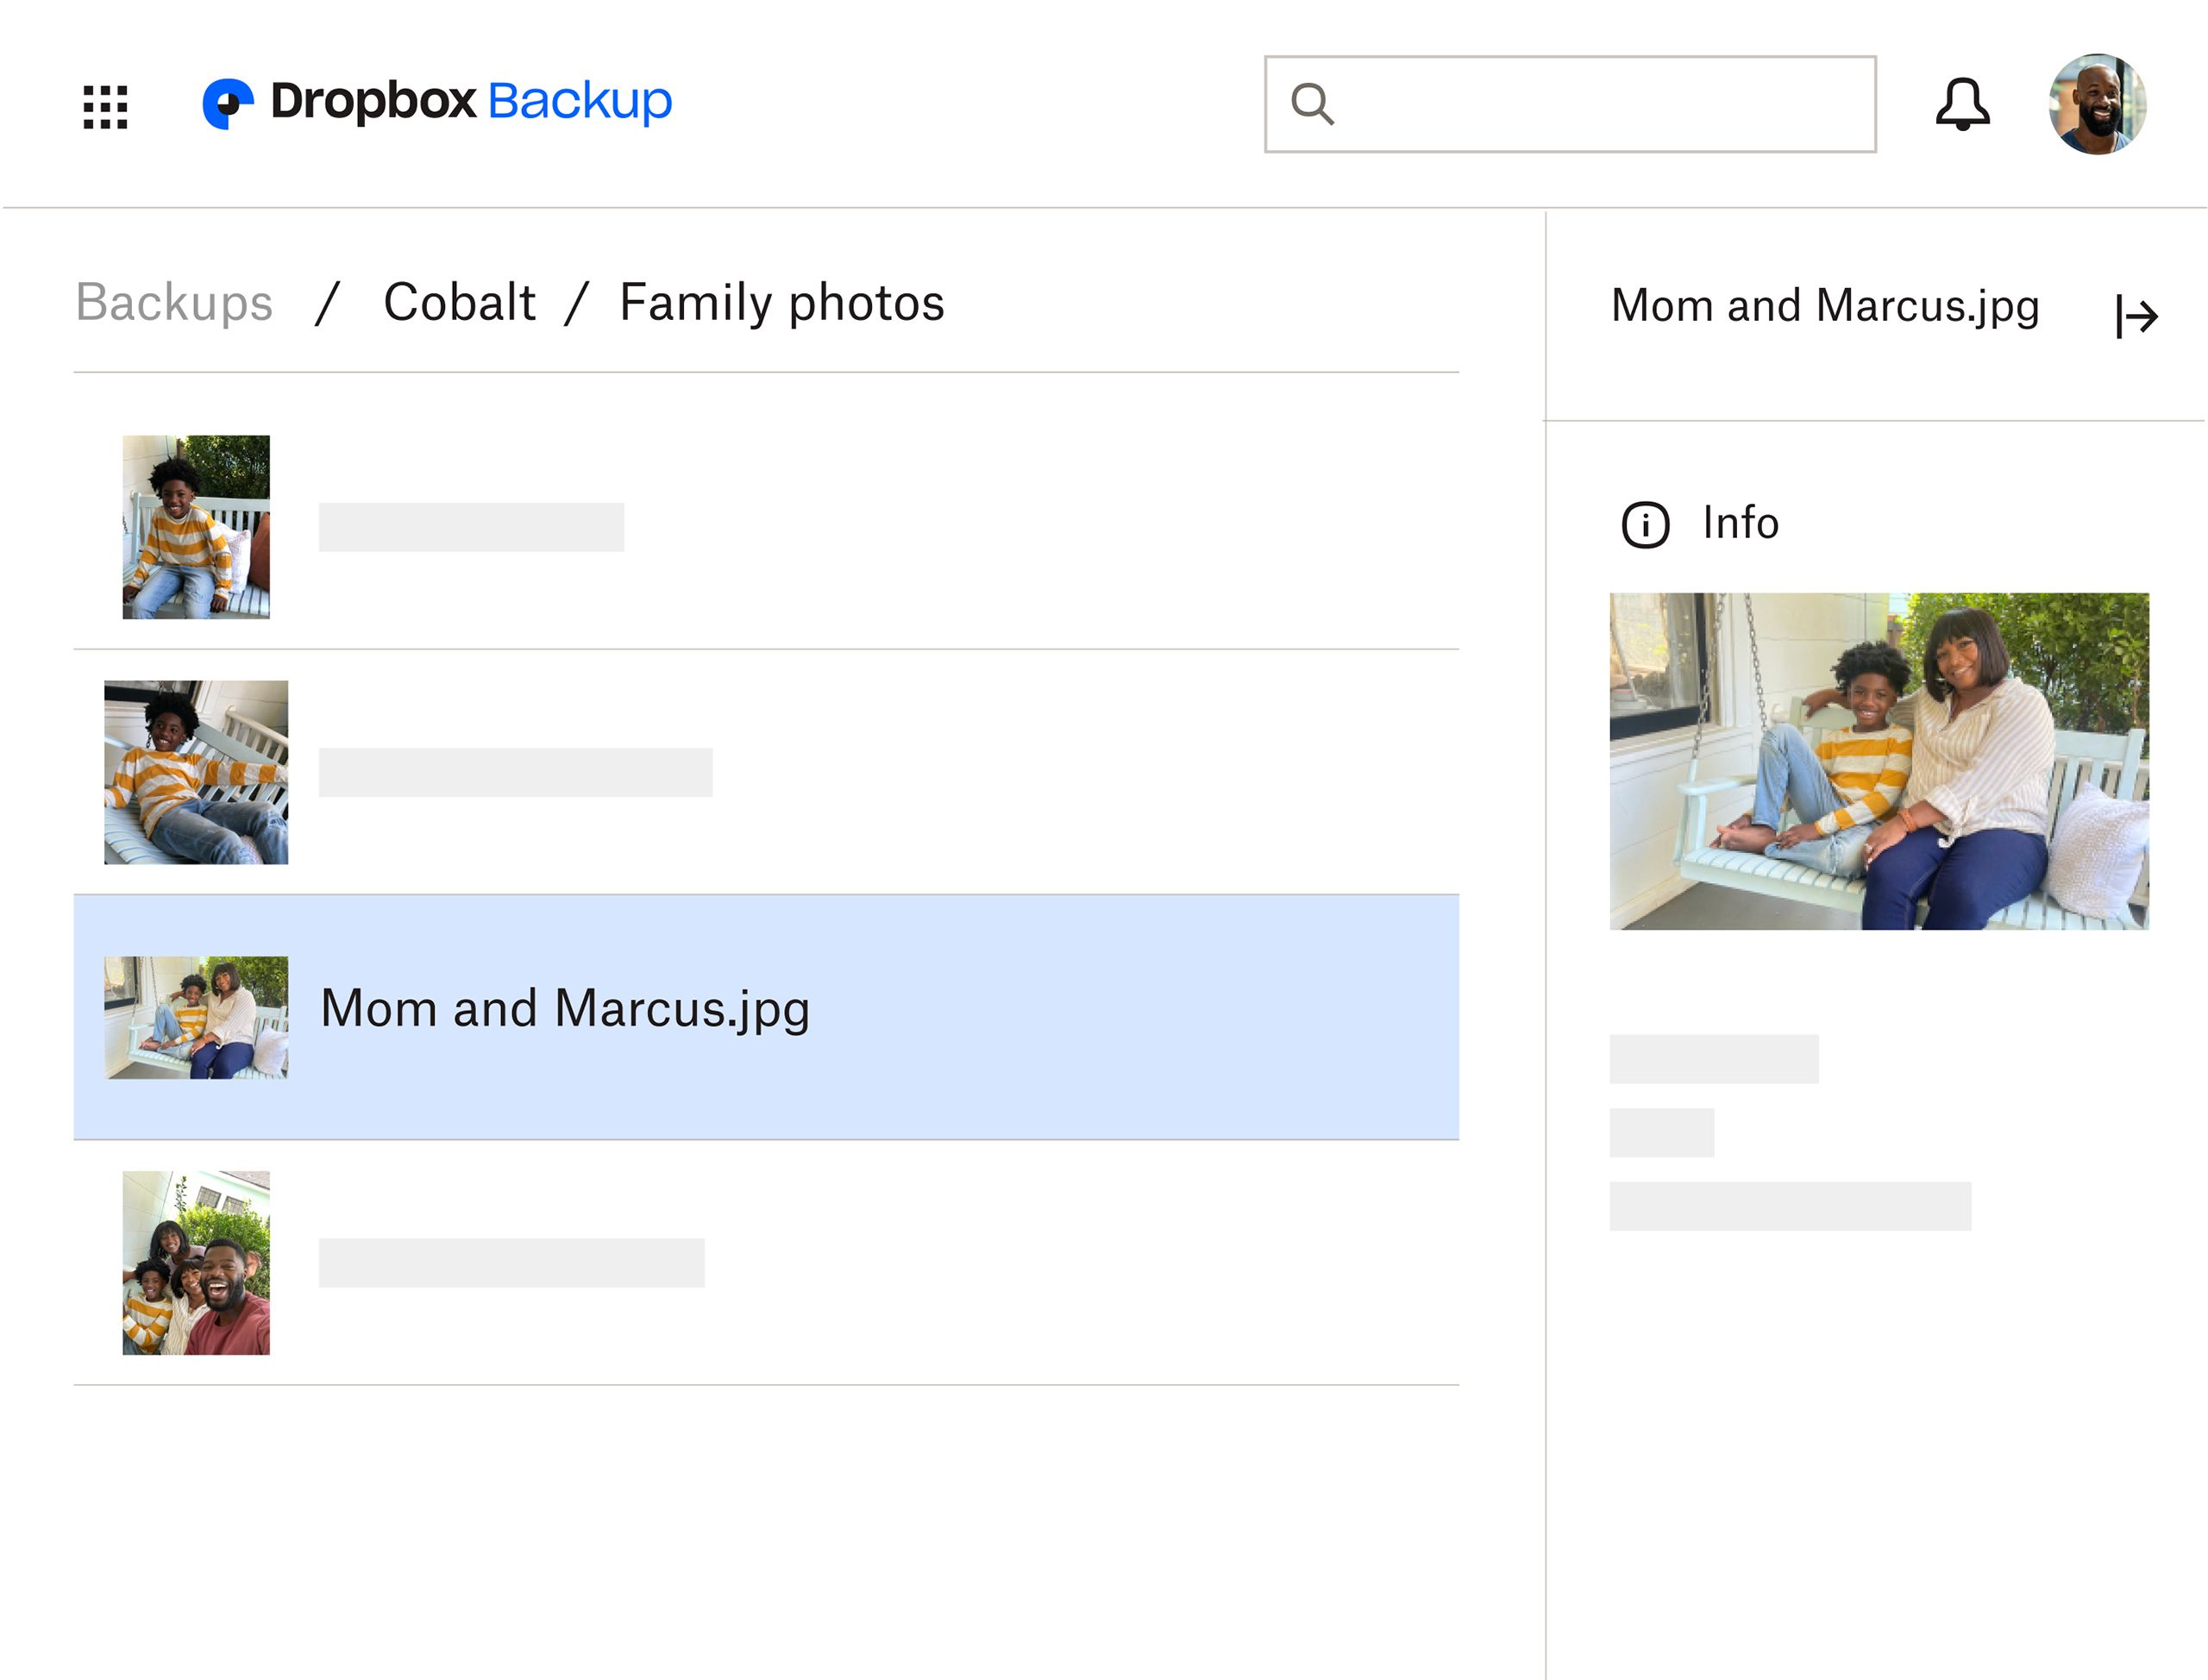 The Dropbox Backup interface in which a user views family photos